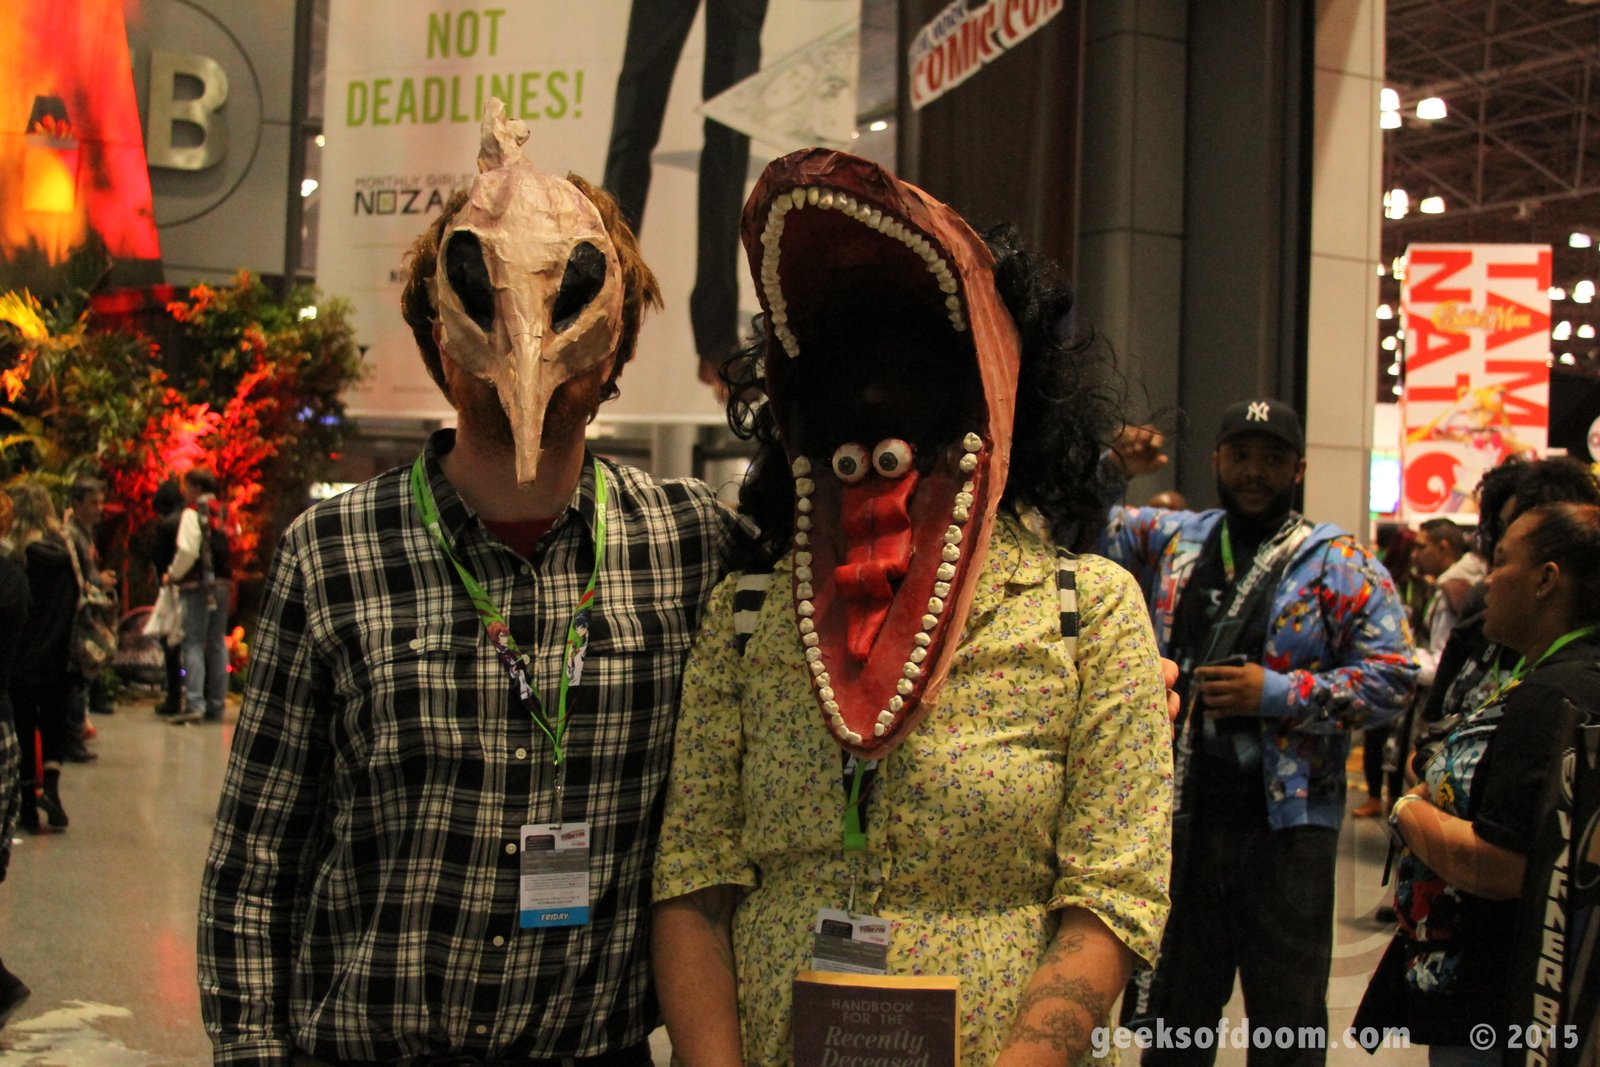 The Maitlands cosplay